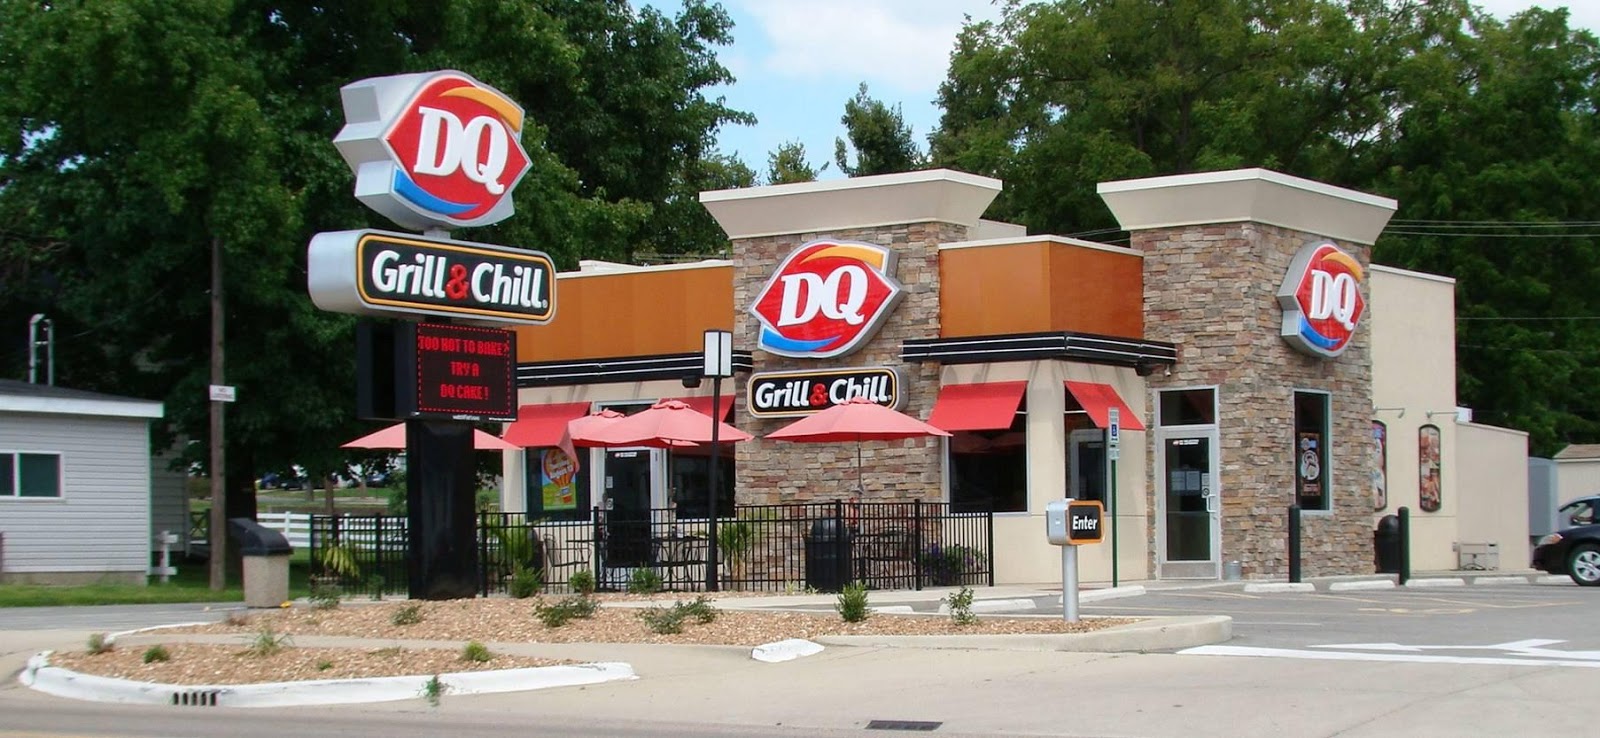 Coupon STL: Groupon St Louis - DQ Grill & Chill in Lebanon, IL